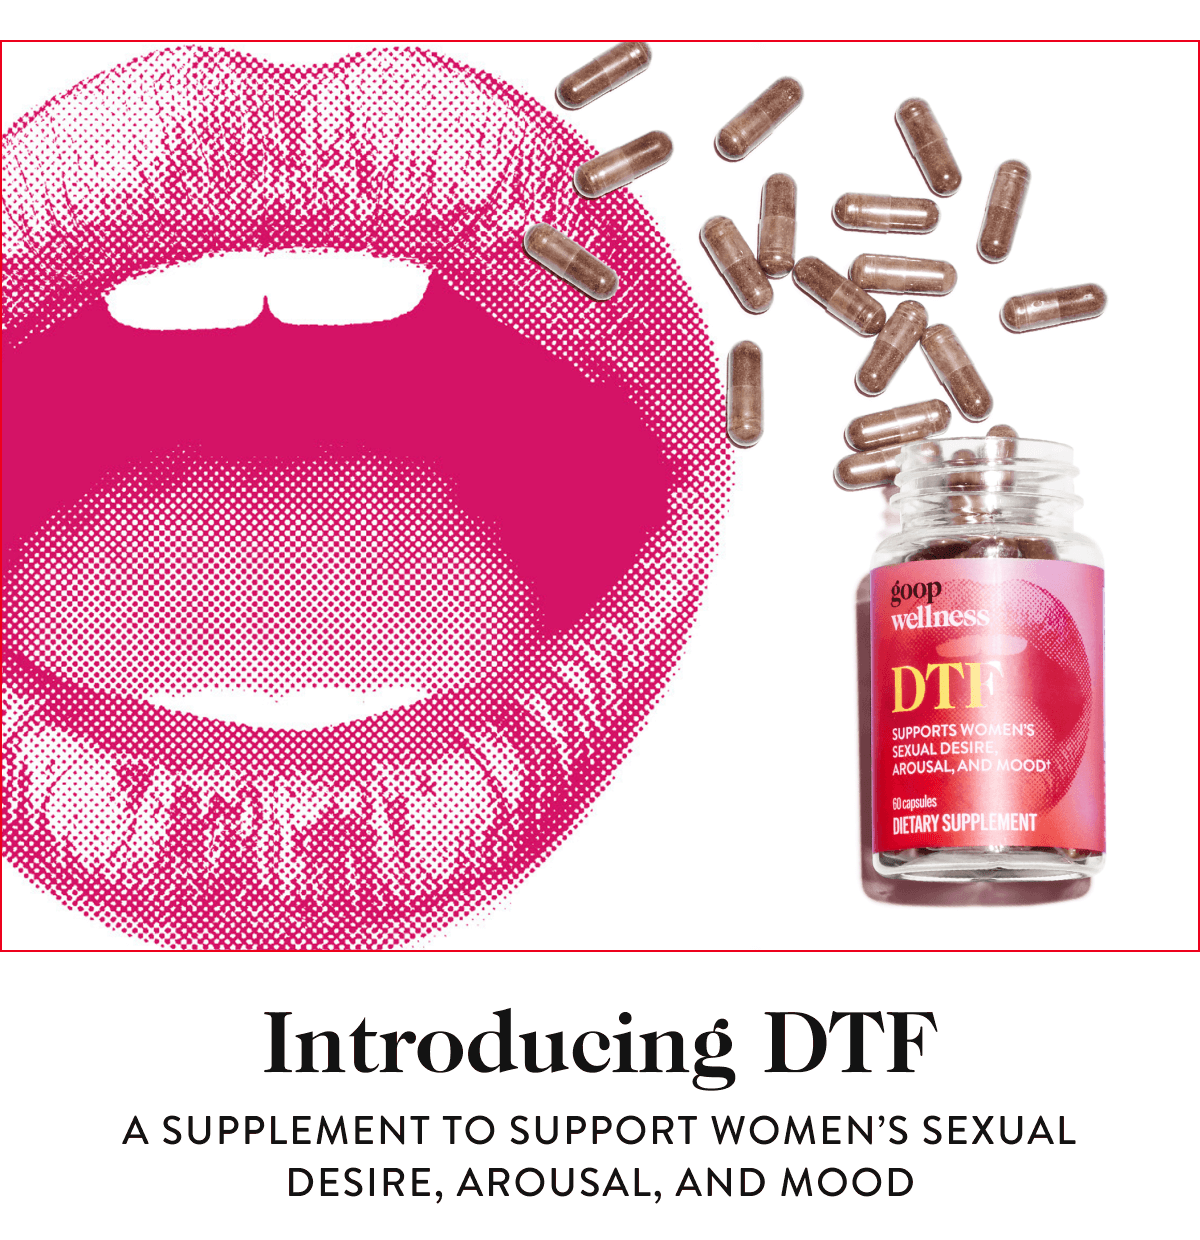 Introducing DTF - A Supplement to Support Women’s Sexual Desire, Arousal, and Mood